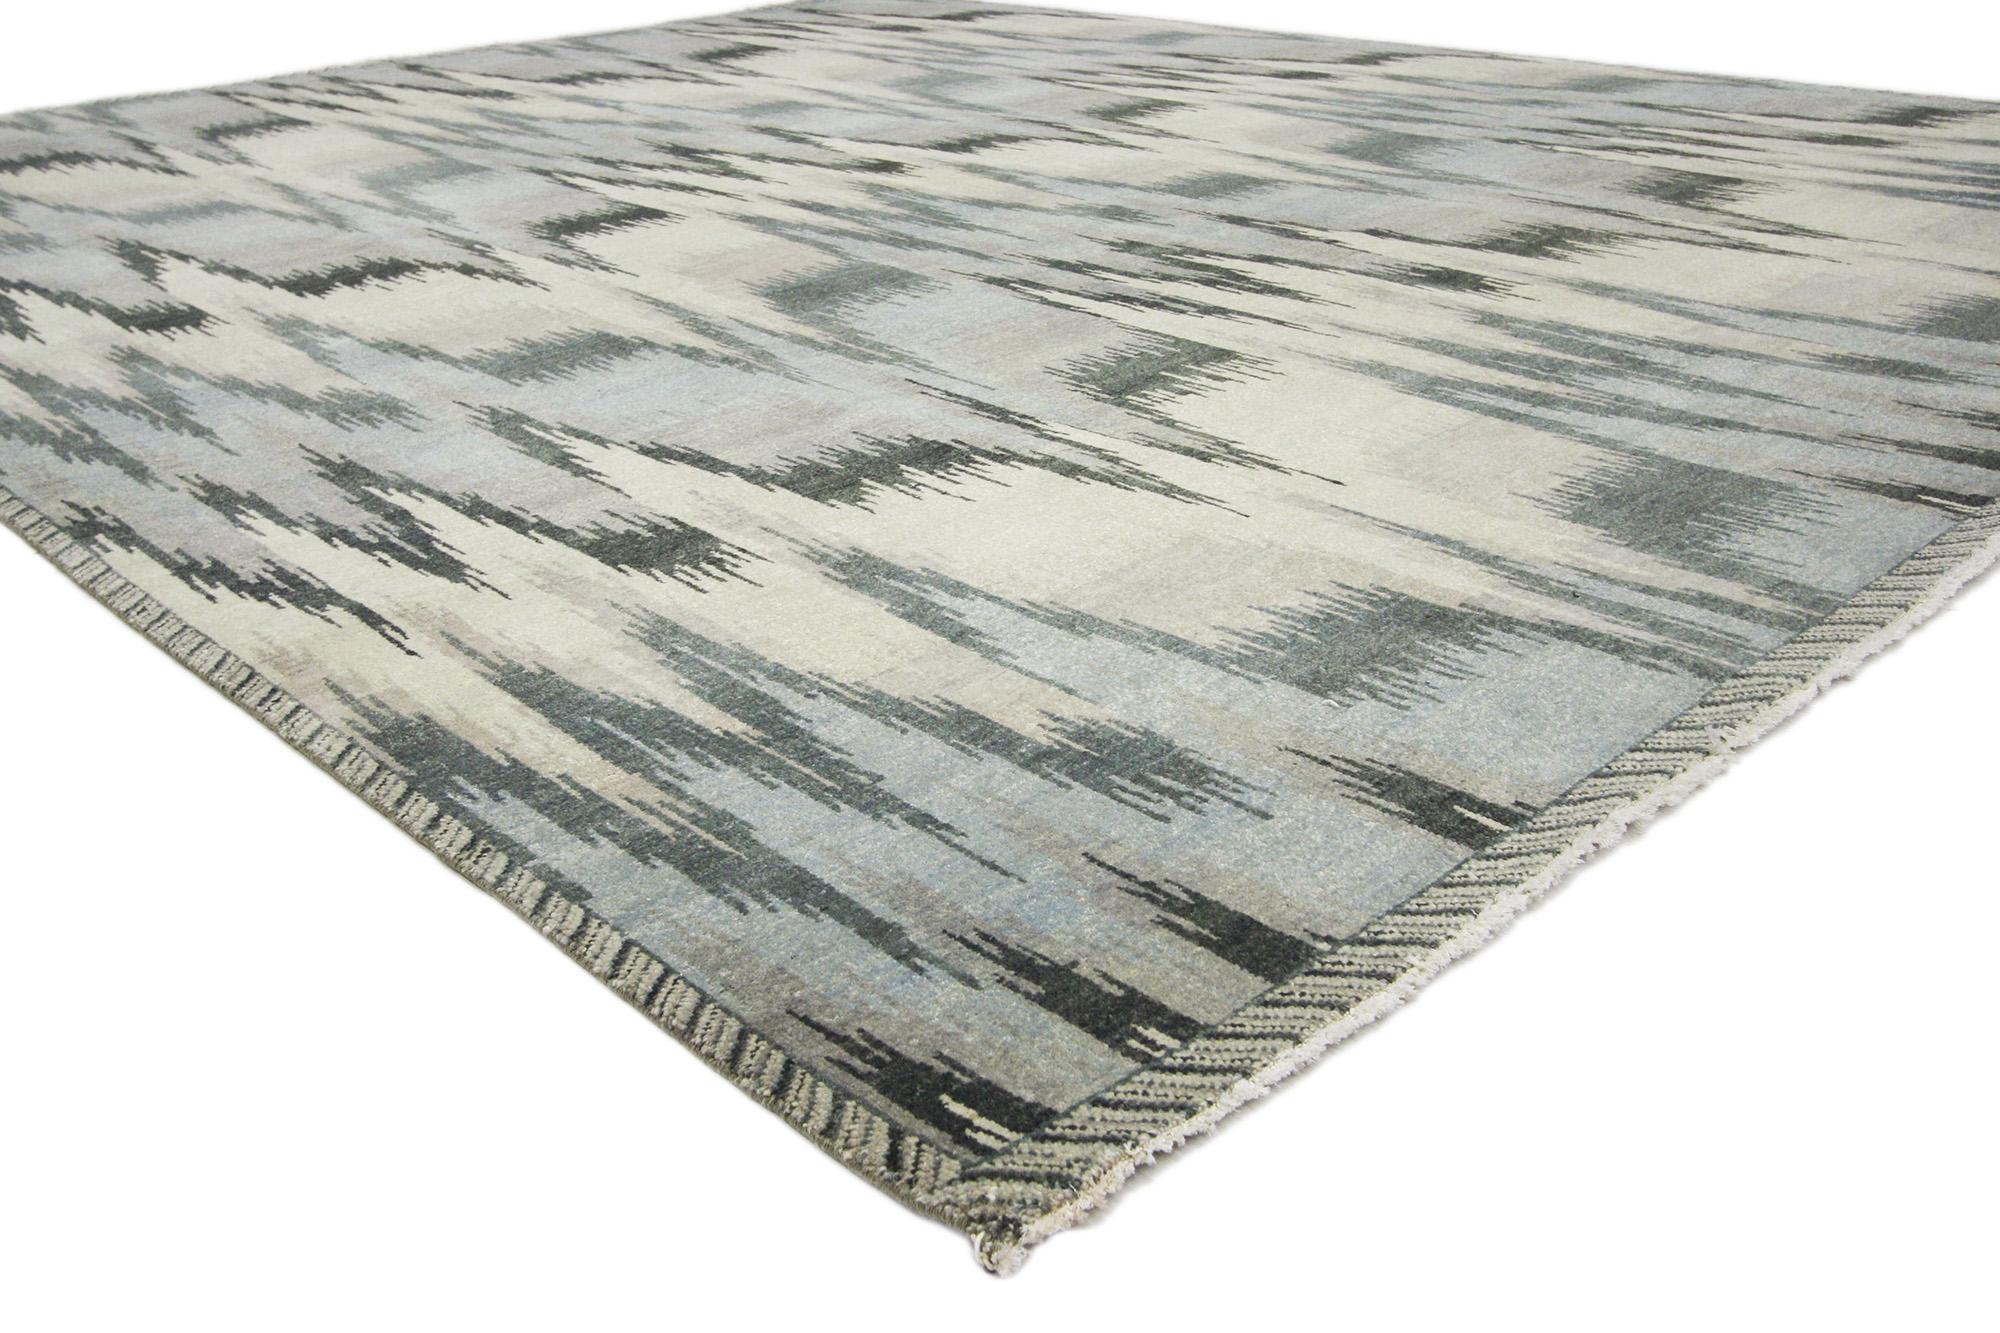 30048 New Transitional Ikat Rug, 08'00 X 09'09.
With its incredible detail and texture, this hand knotted wool Ikat rug from India is a captivating vision of woven beauty. The eye-catching  abstract ikat design and colorway woven into this piece